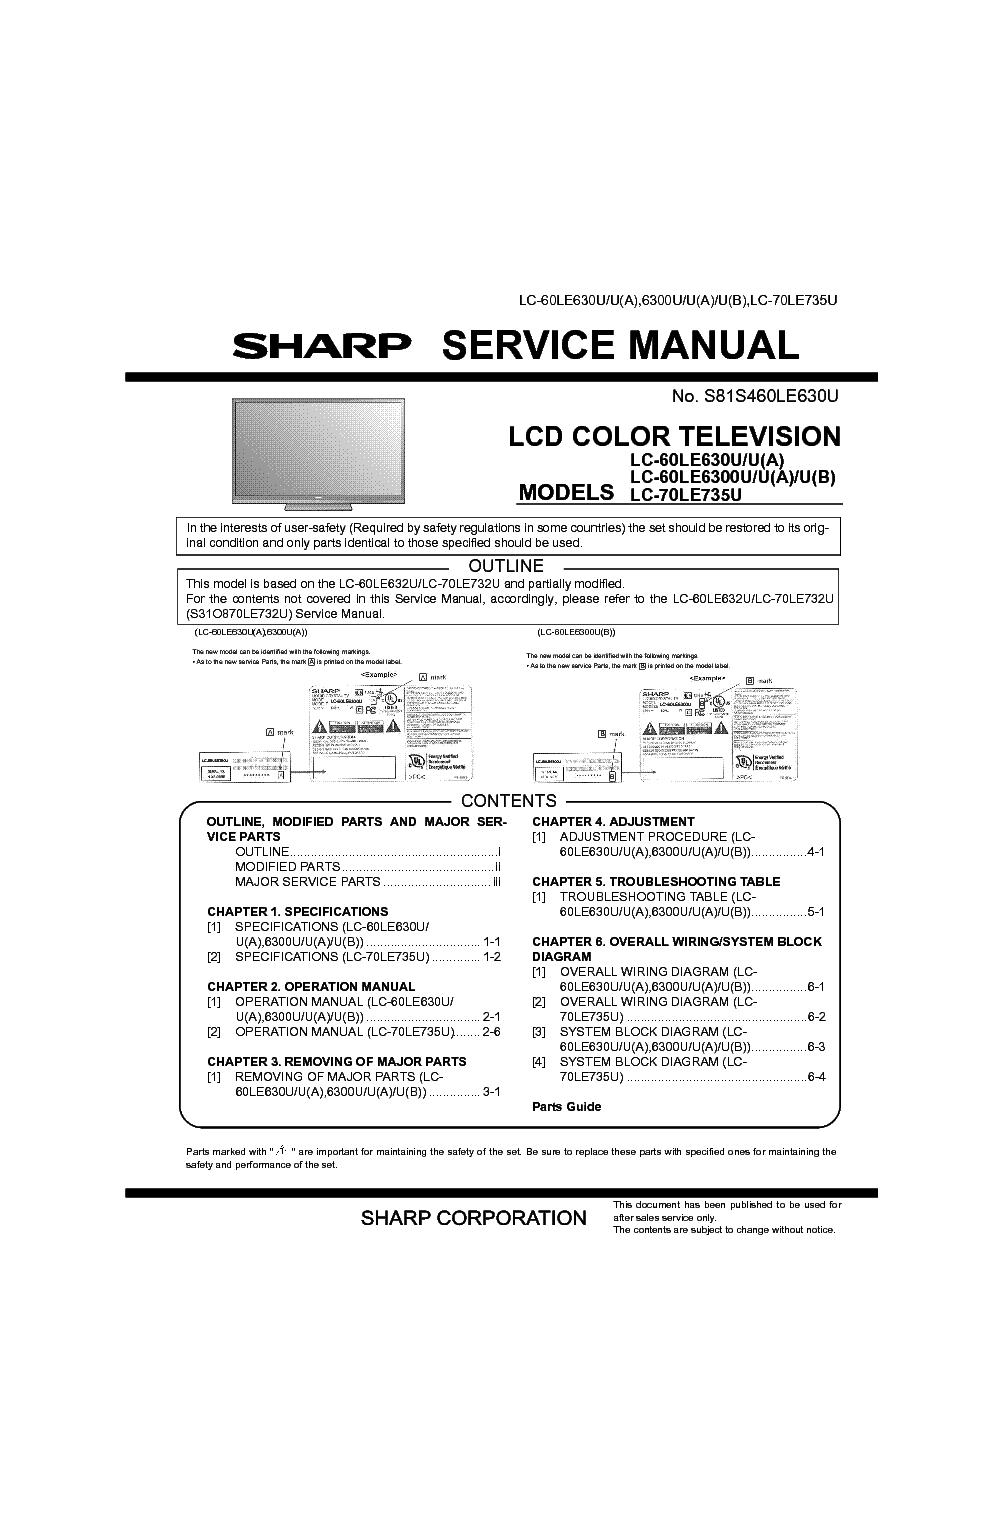 SHARP LC-60LE630U-A LC-60LE6300U-A-B LC-70LE735U EXCLUDING PWB service manual (1st page)